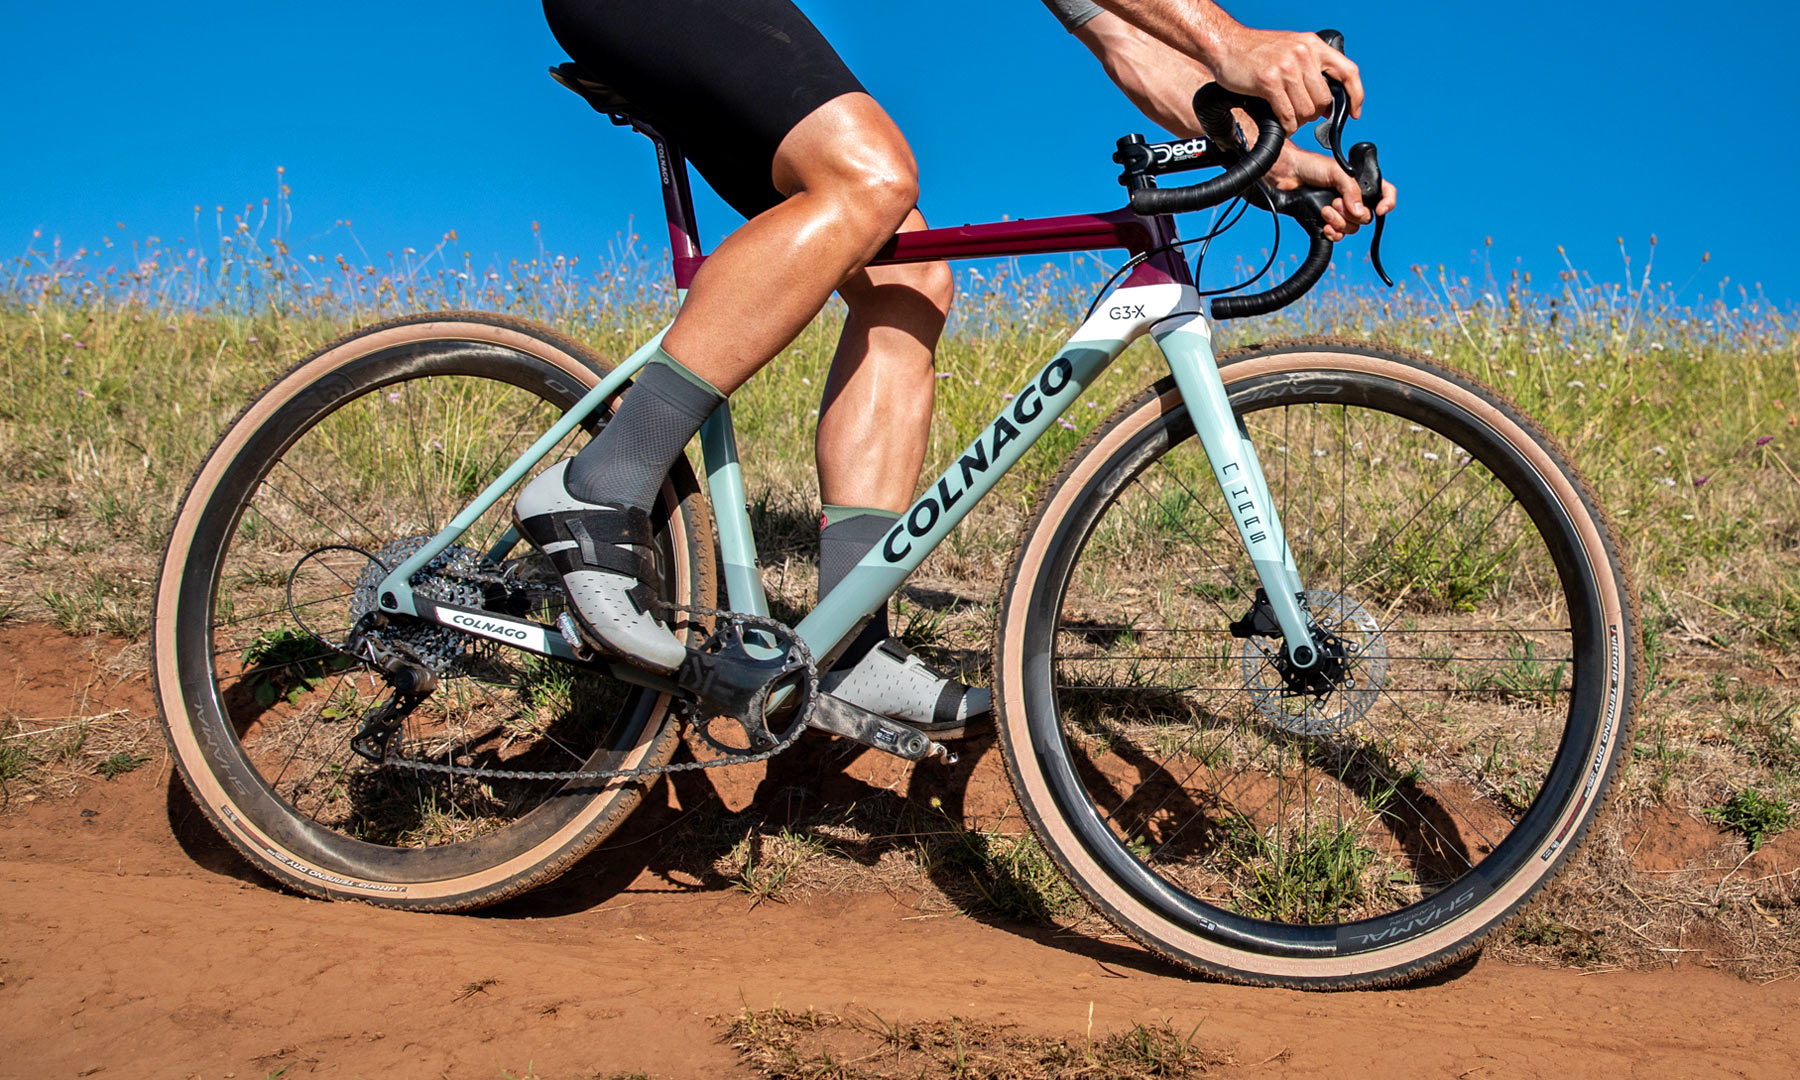 Colnago G3-X carbon gravel bike goes UCI racing